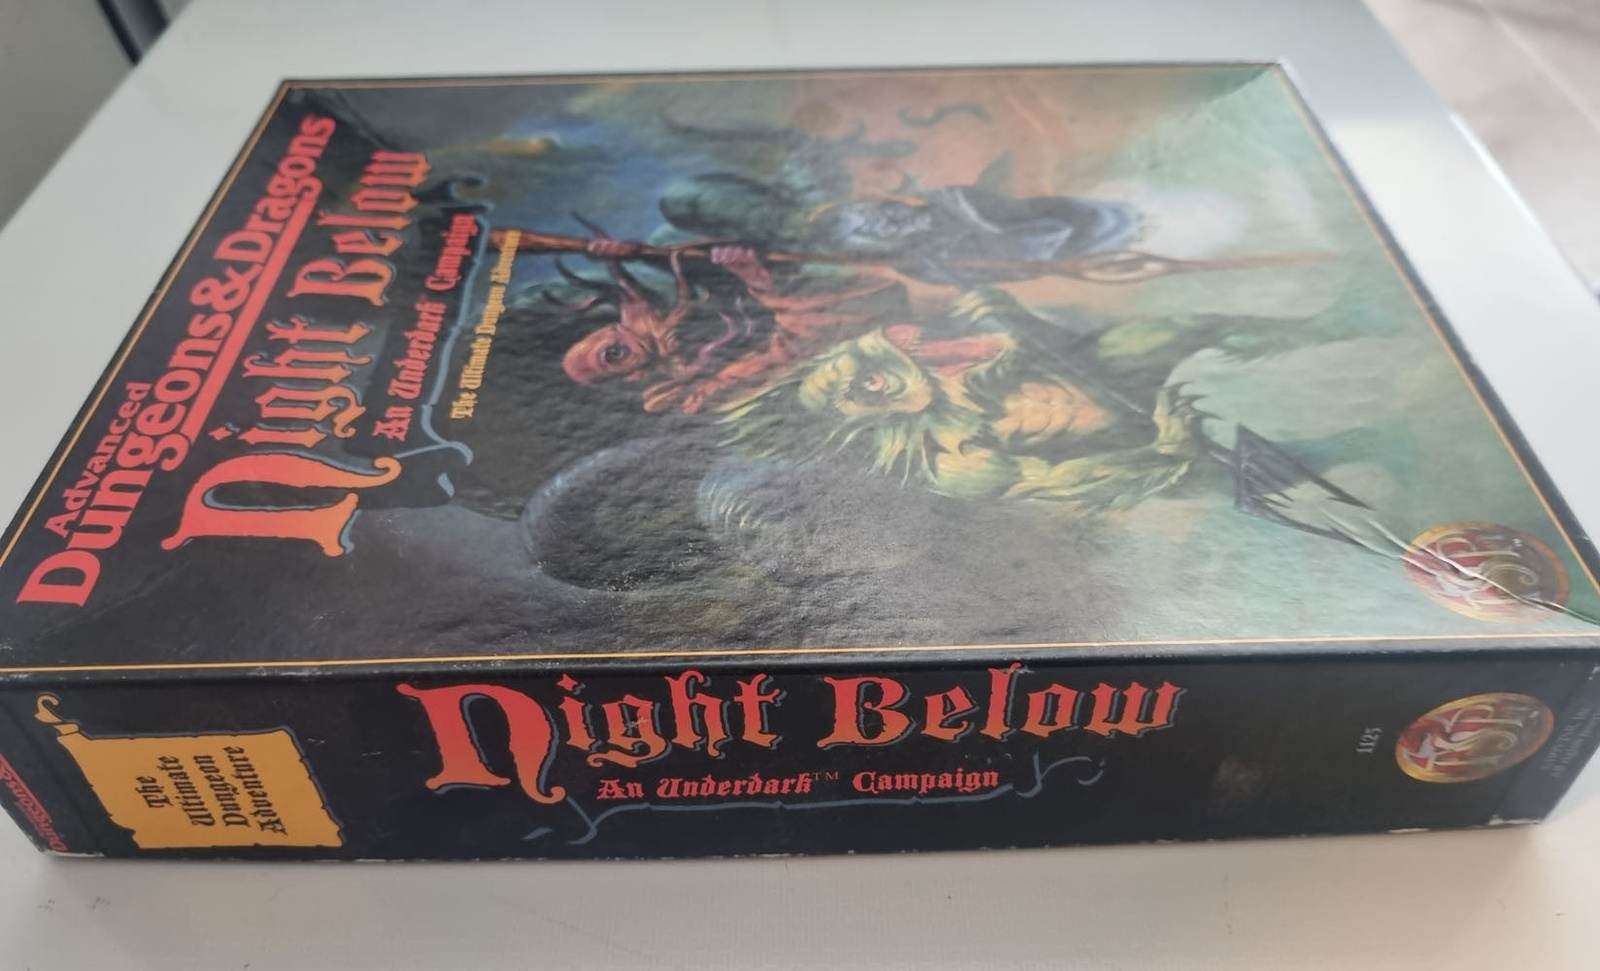 Advanced Dungeons and Dragons: Night Below - An Underdark Campaign